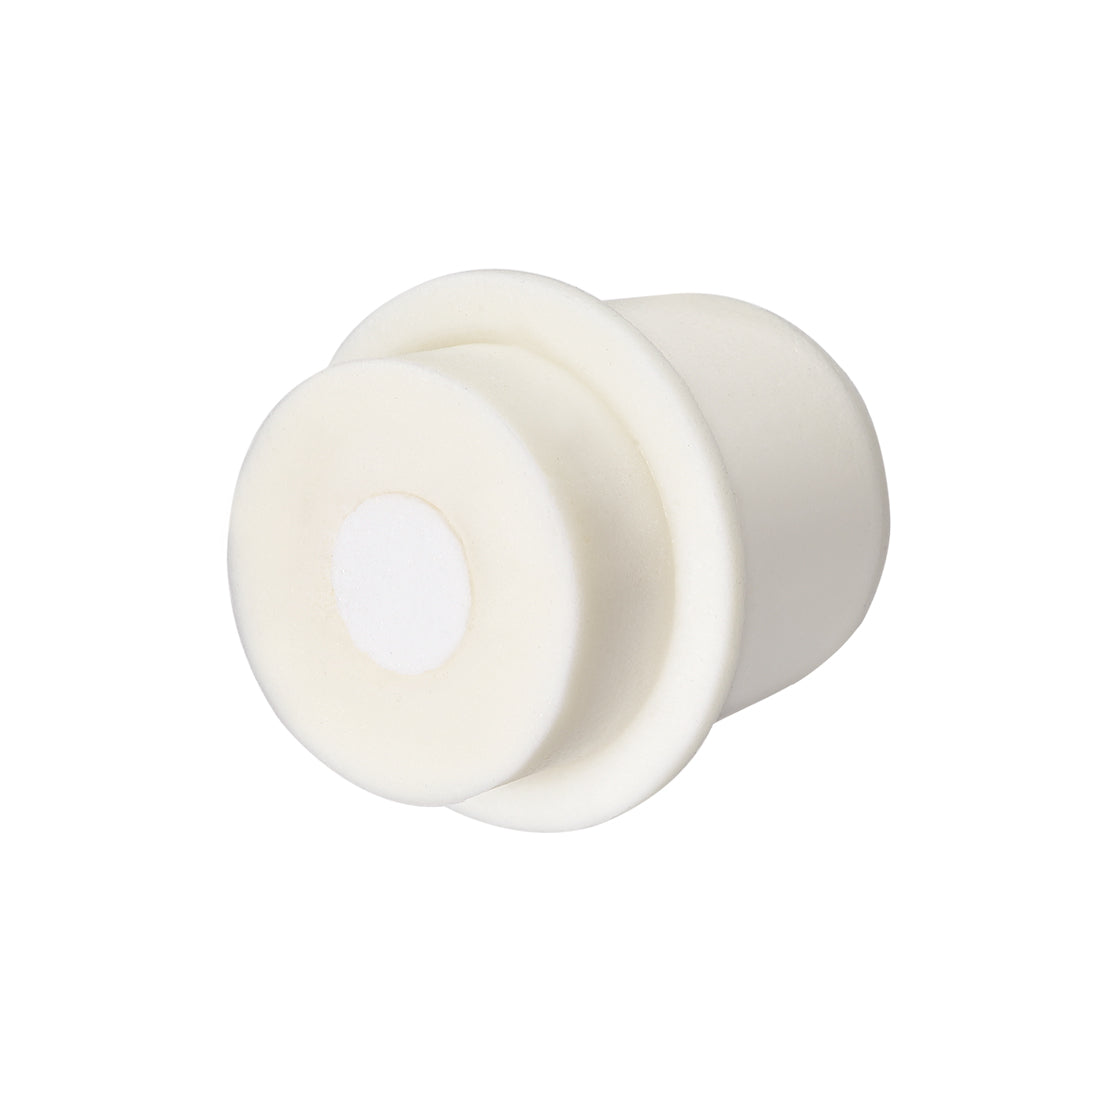 uxcell Uxcell 37-41mm Beige Drilled Silicone Stopper Plugs for Flask Test Tube Stopper